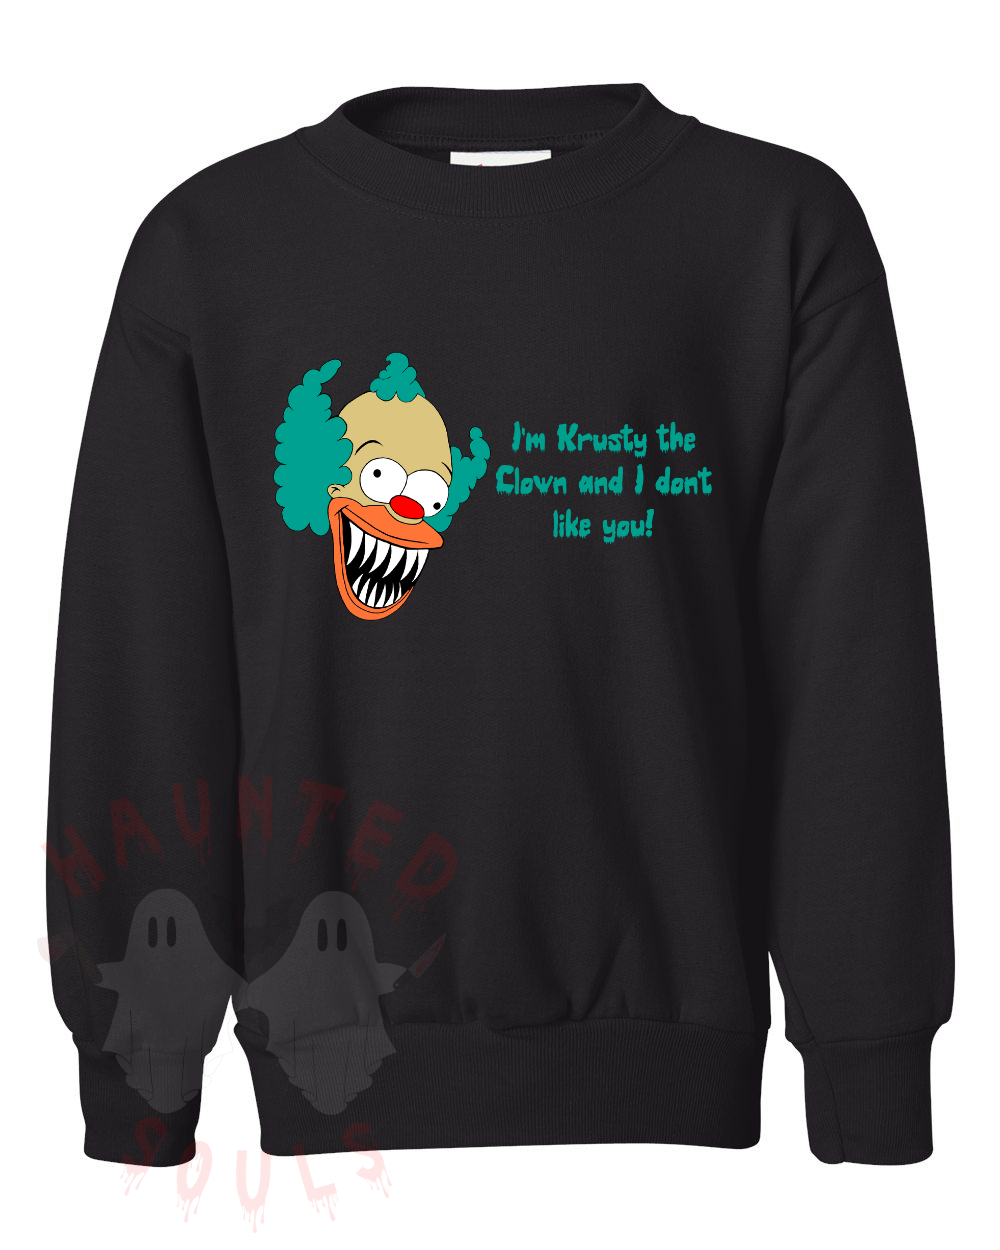 Krusty the Clown Inspired Youth Crewneck